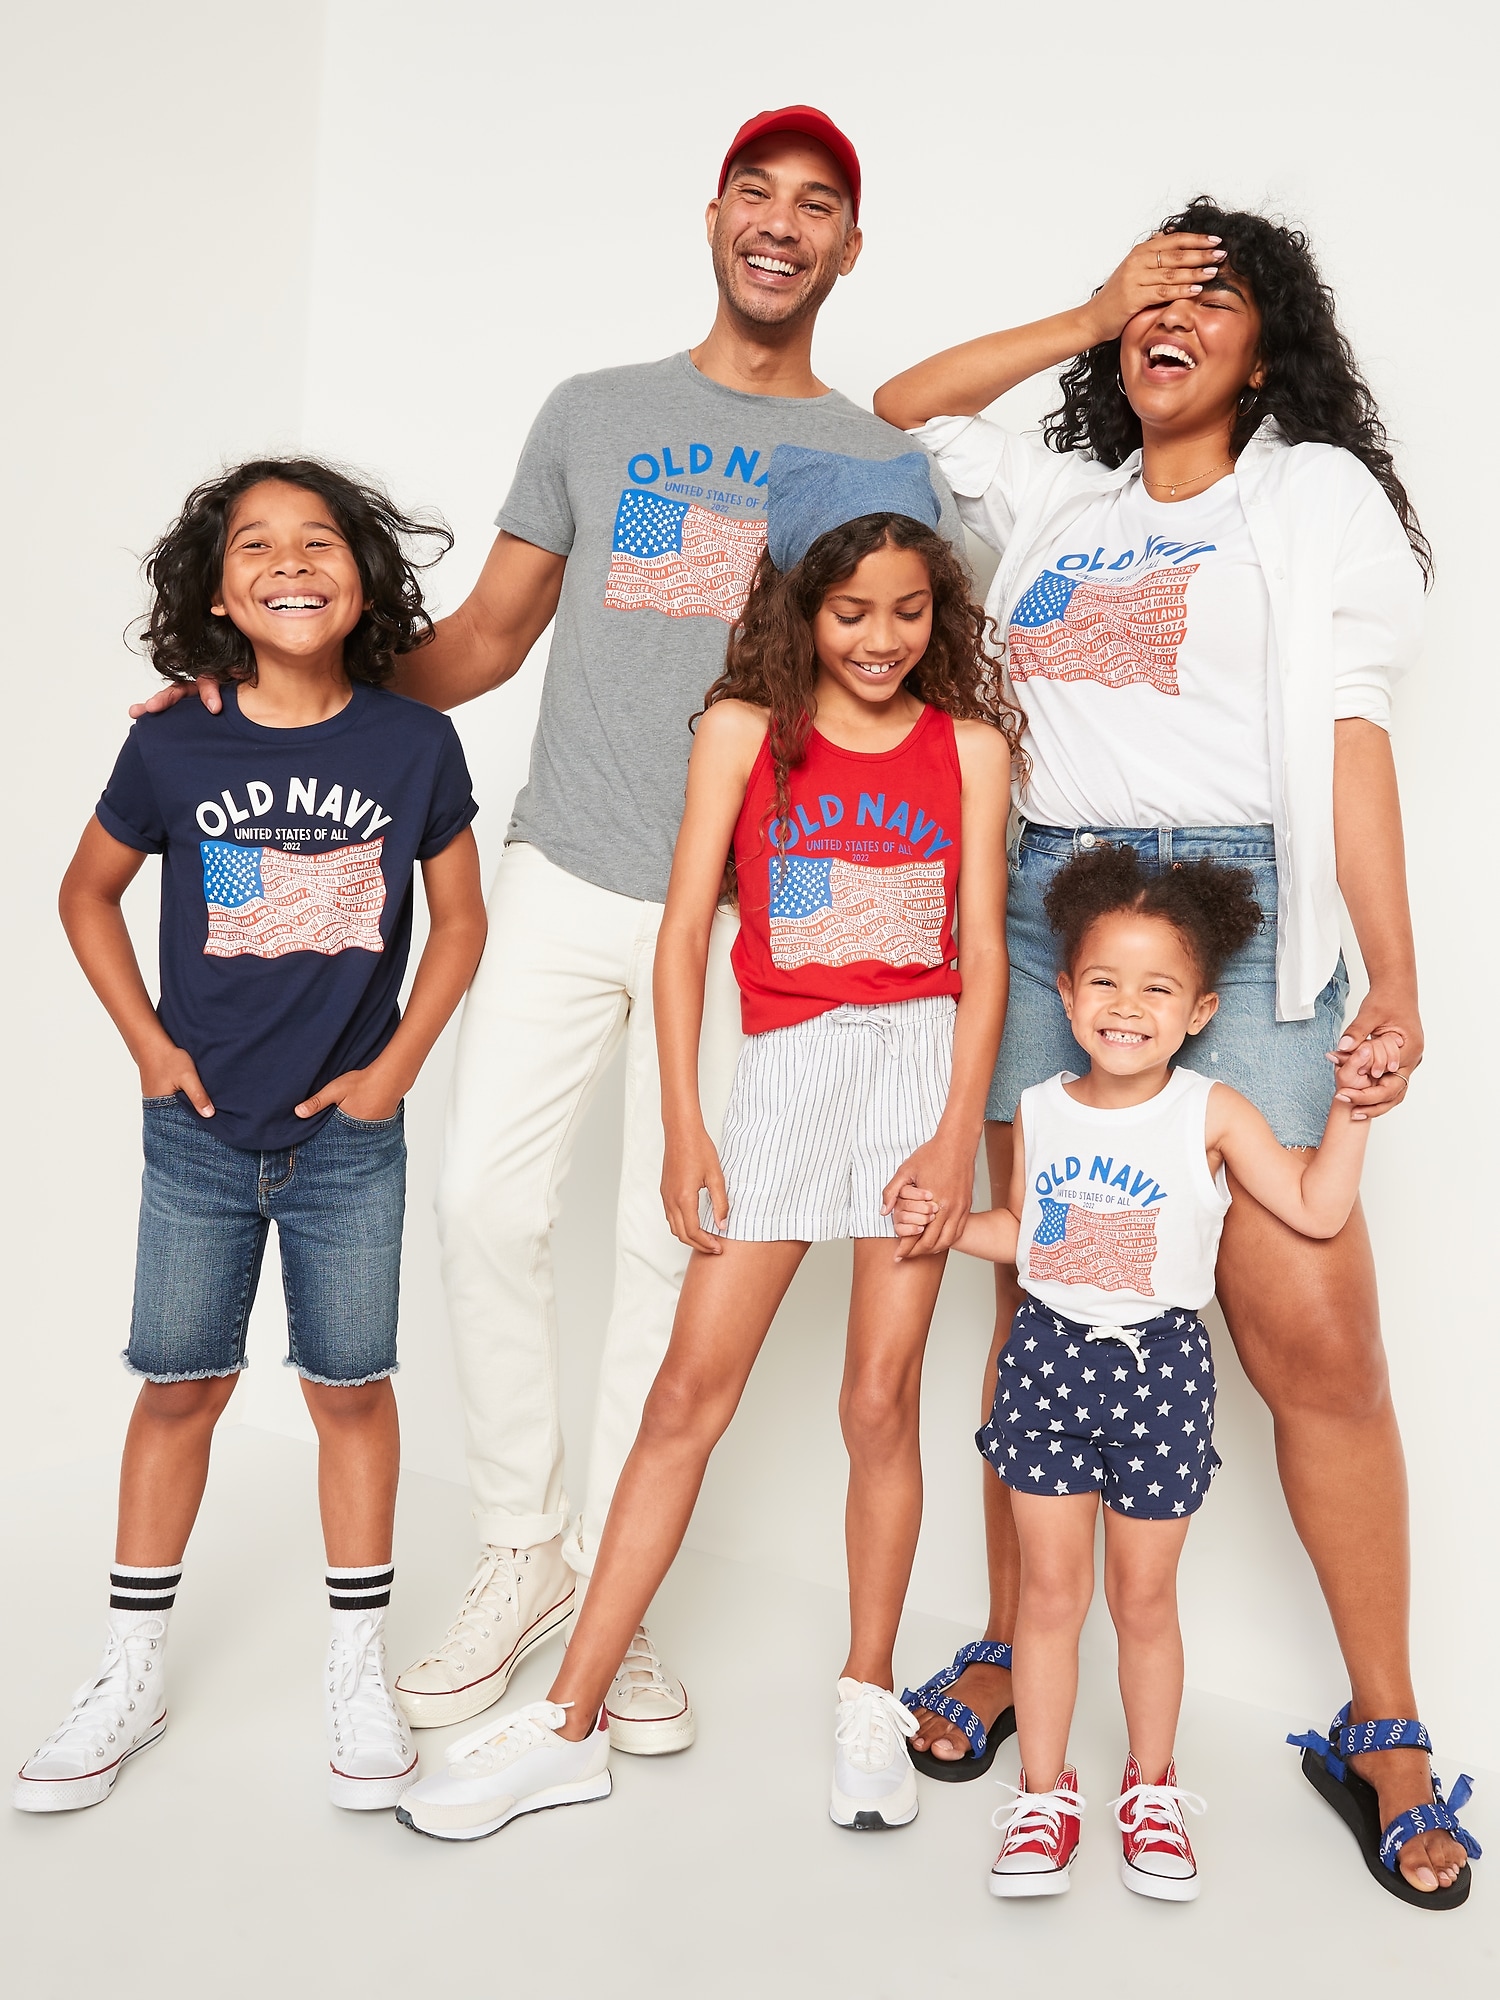 Family wears Old Navy T-shirts every July 4th for 20 years